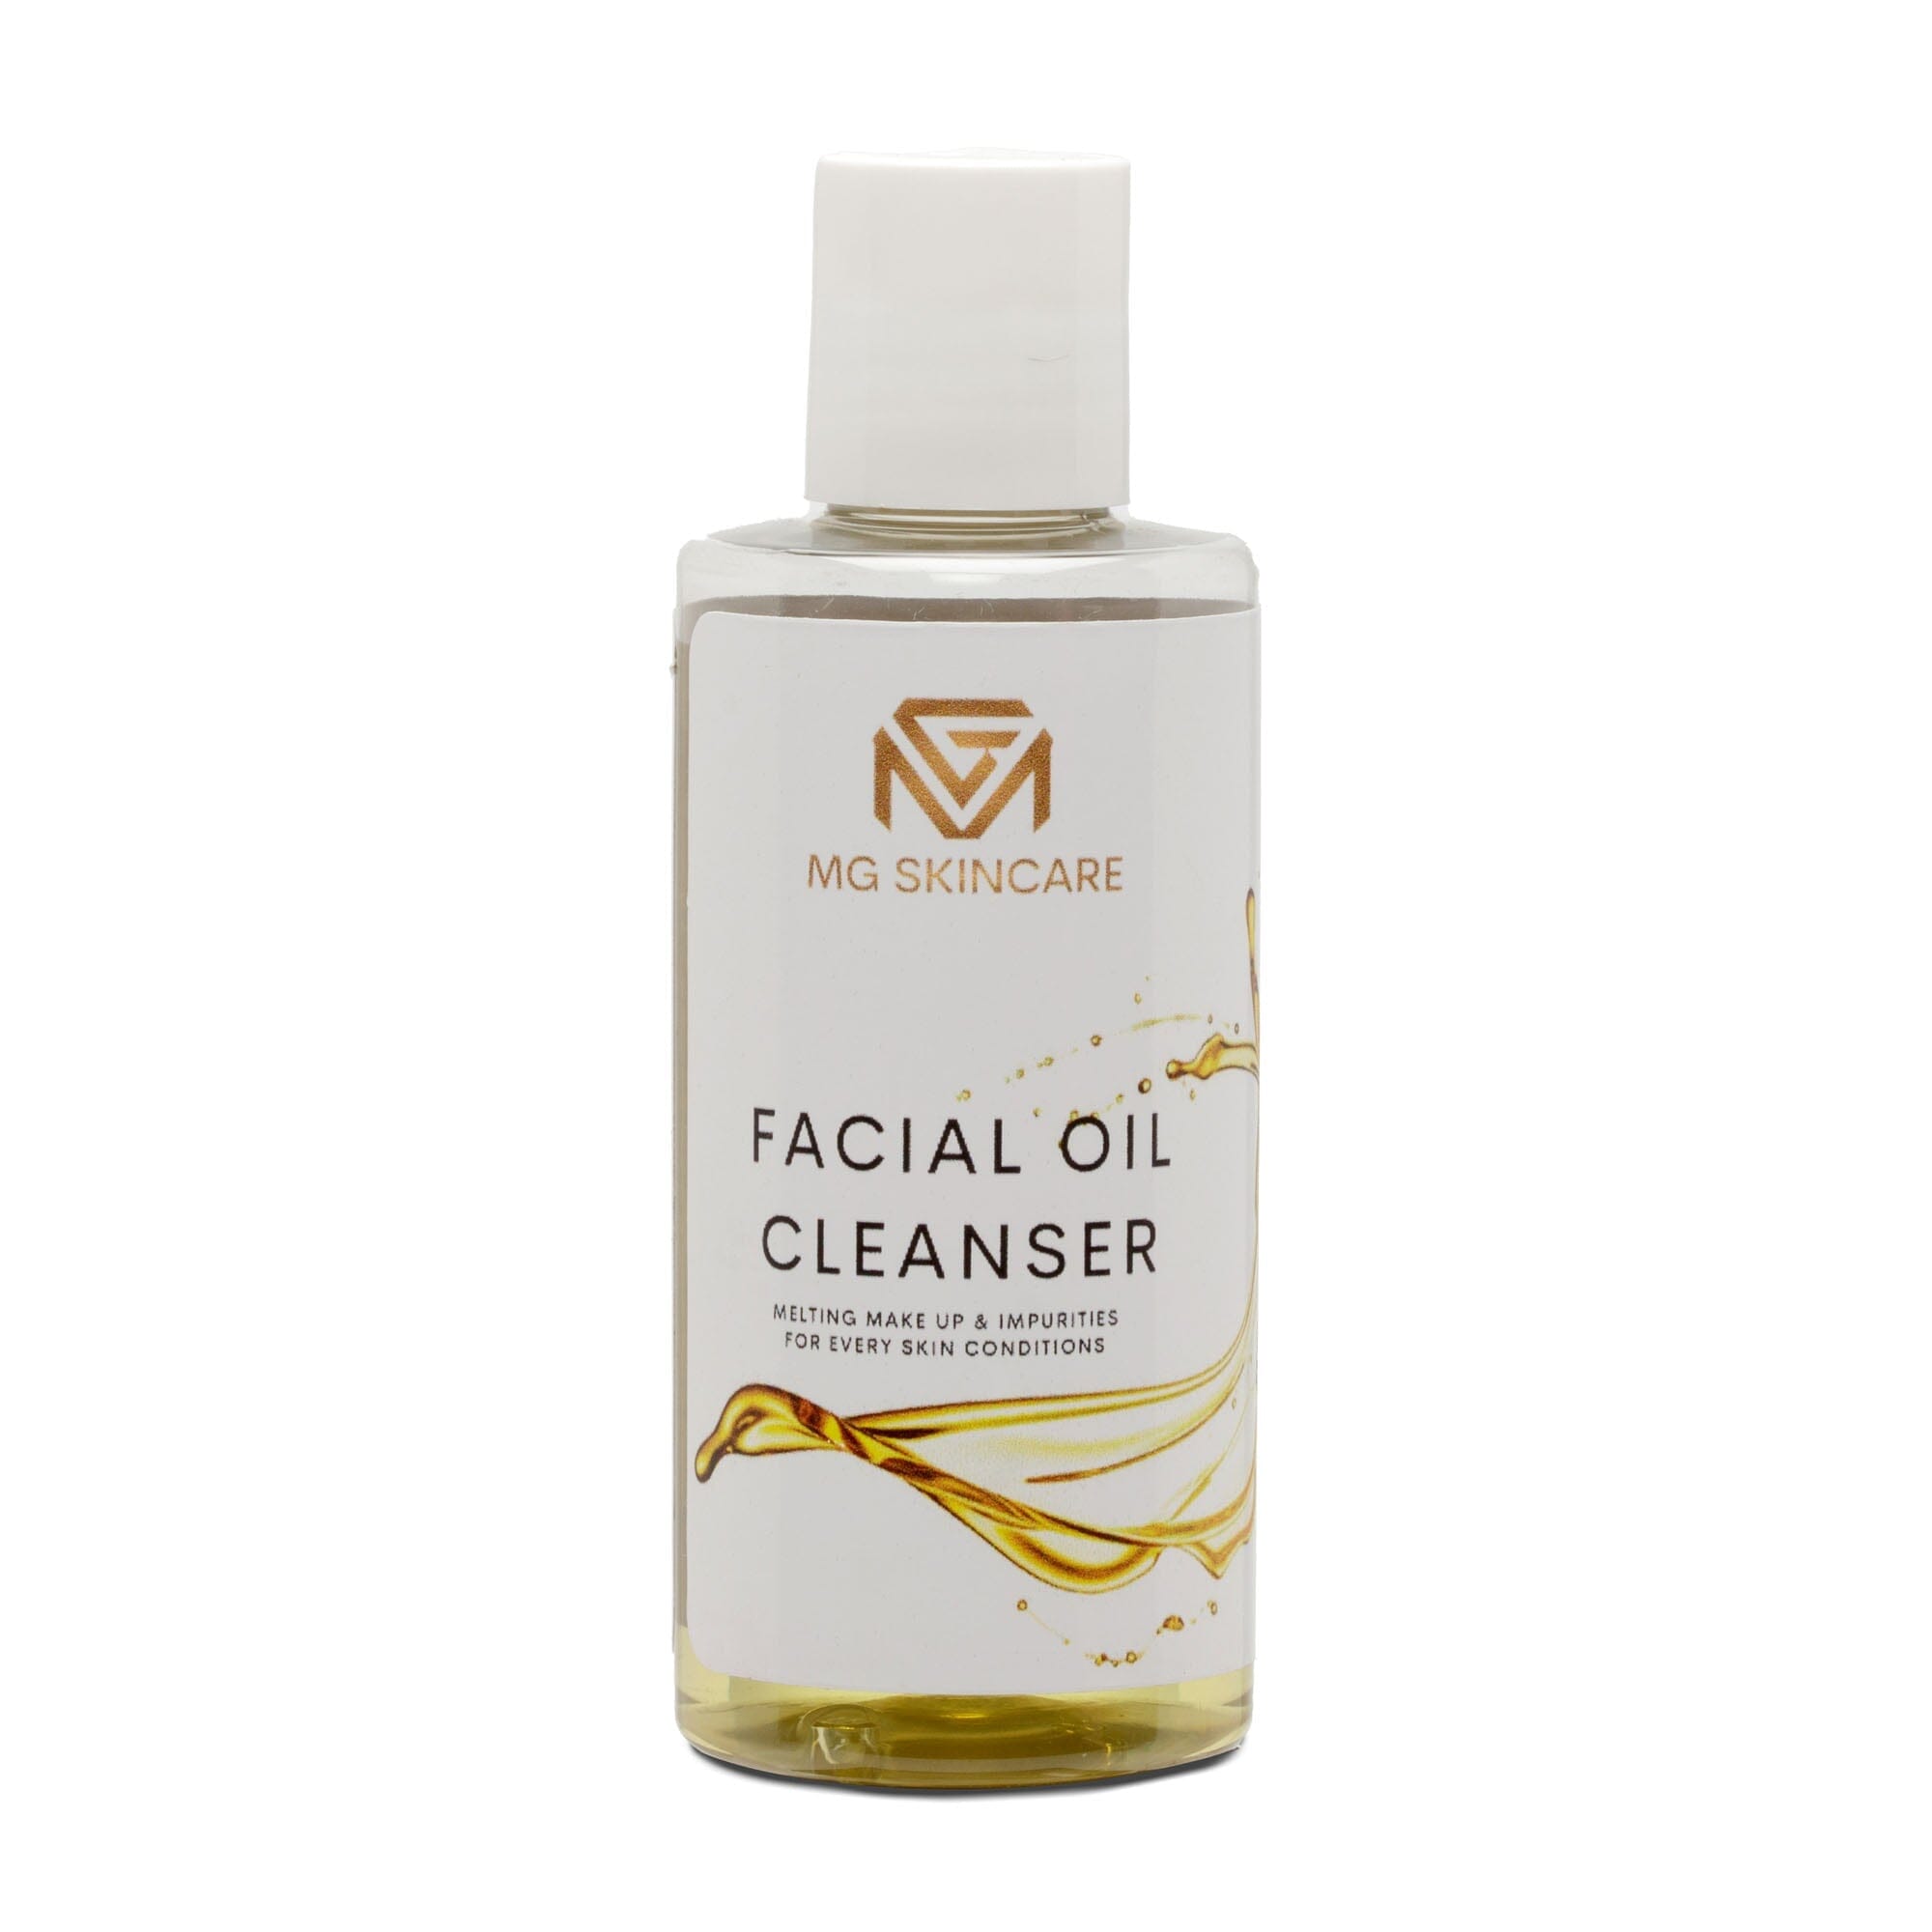 you the ultimate skincare experience. Facial Oil Cleanser - Deeply cleanse and hydrate your skin with our top-quality formula! Beauty & Health - Skin Care - Face MG Skincare 30ml 